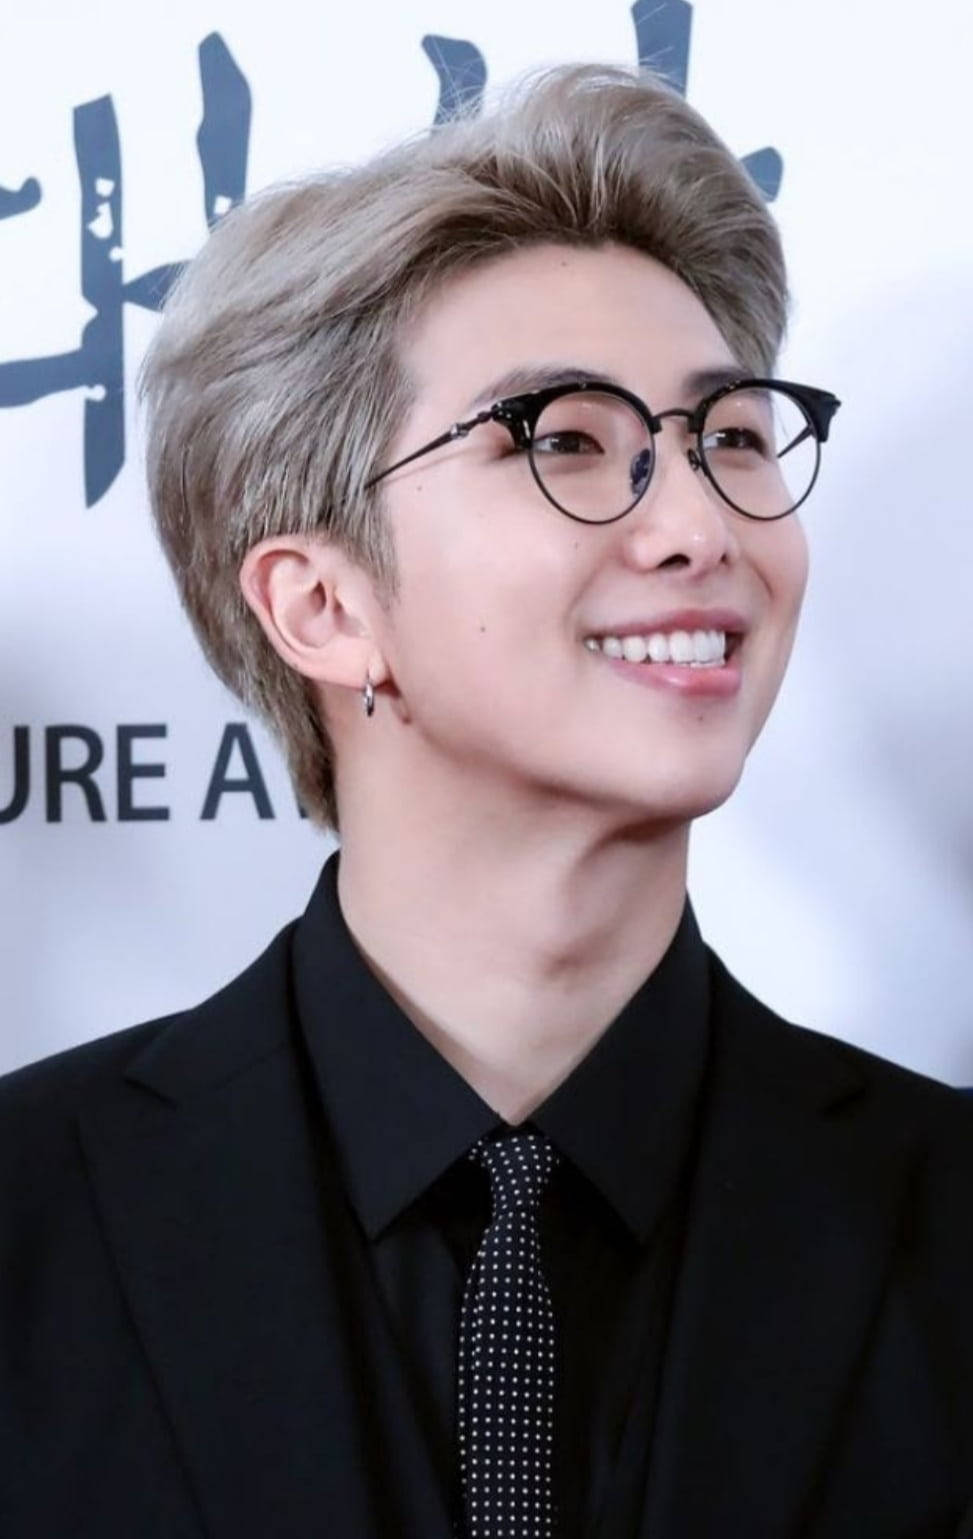 Top 999+ Bts Rm Cute Wallpaper Full HD, 4K Free to Use